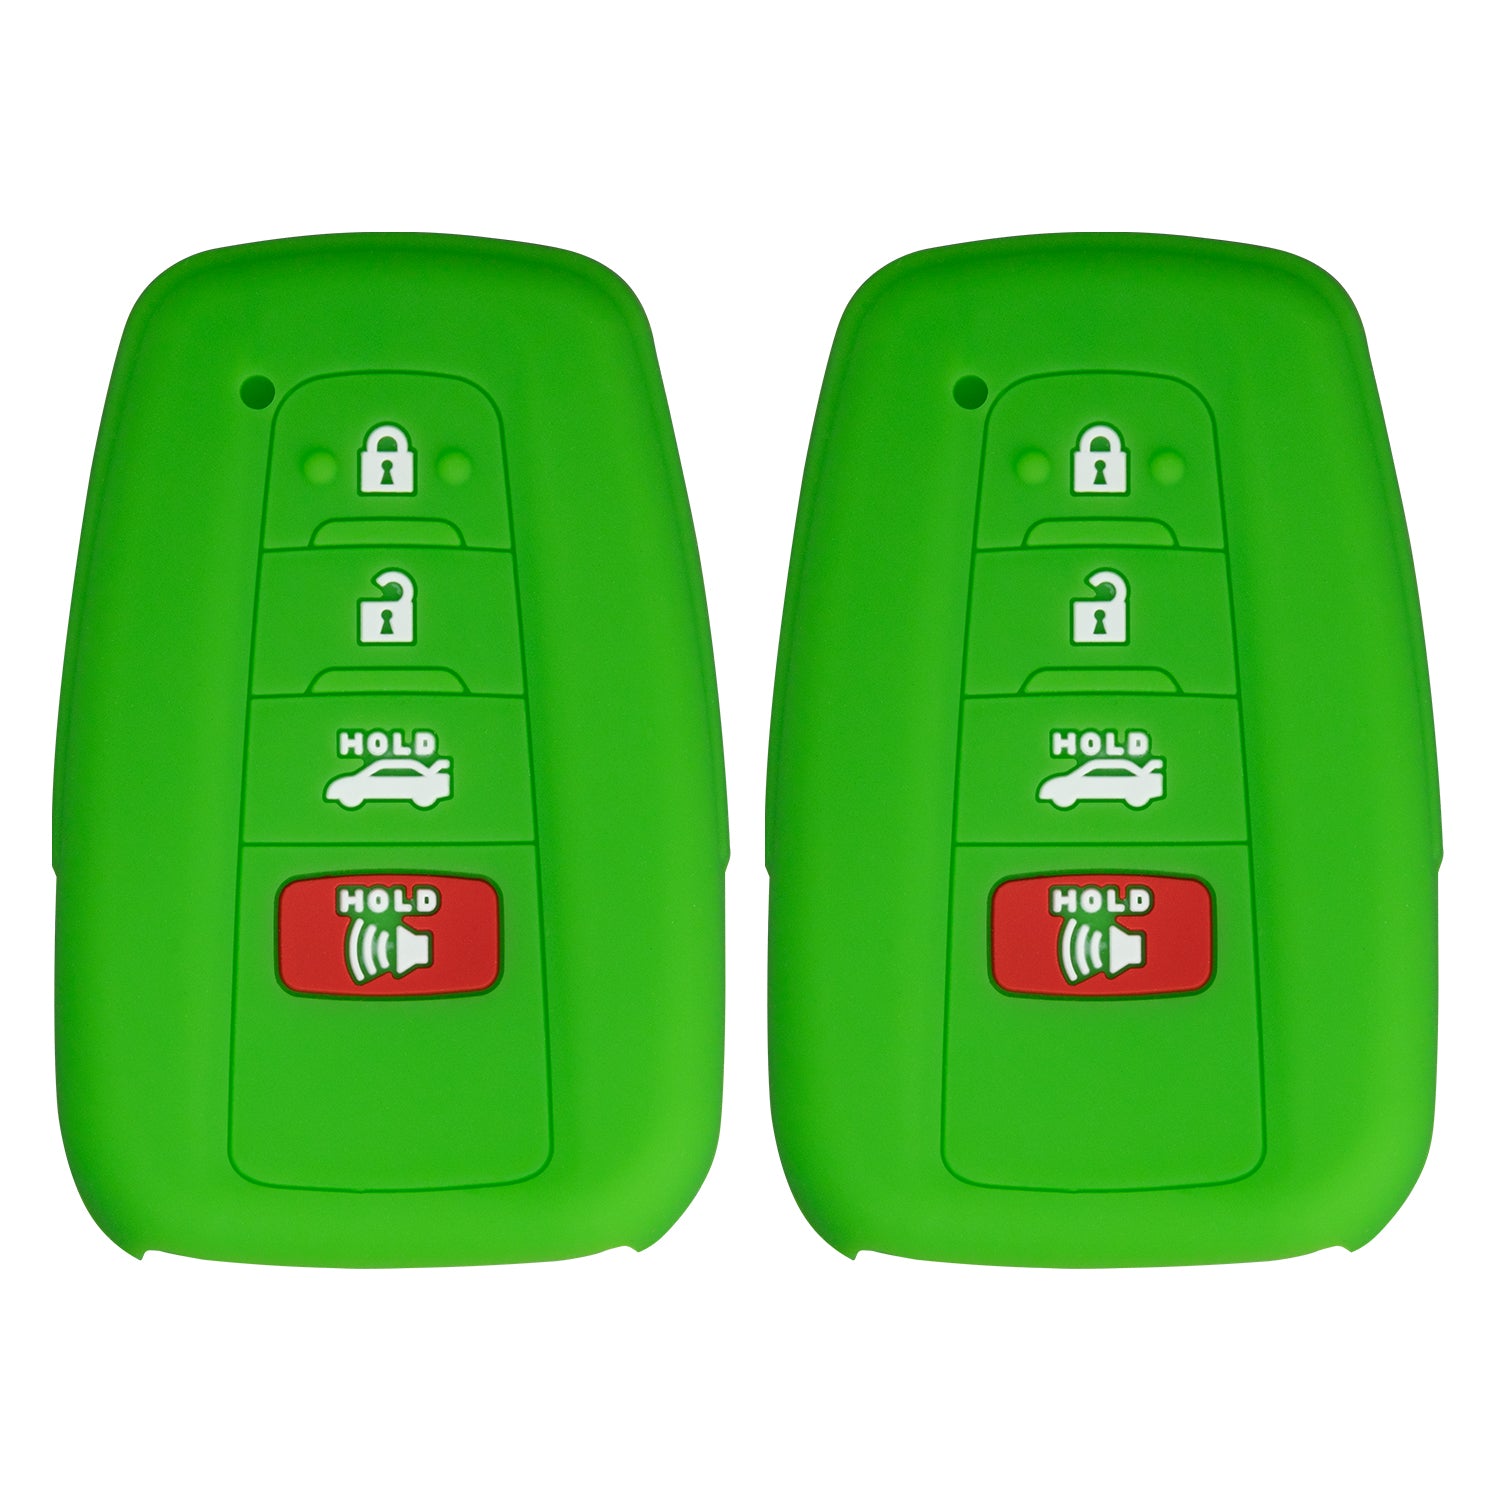 Silicone Case 4 Button Shell for Toyota Smart Proximity Remote Key HYQ14FBE, HYQ14FBC, HYQ14AHP, HYQ14FBN (Double Green)